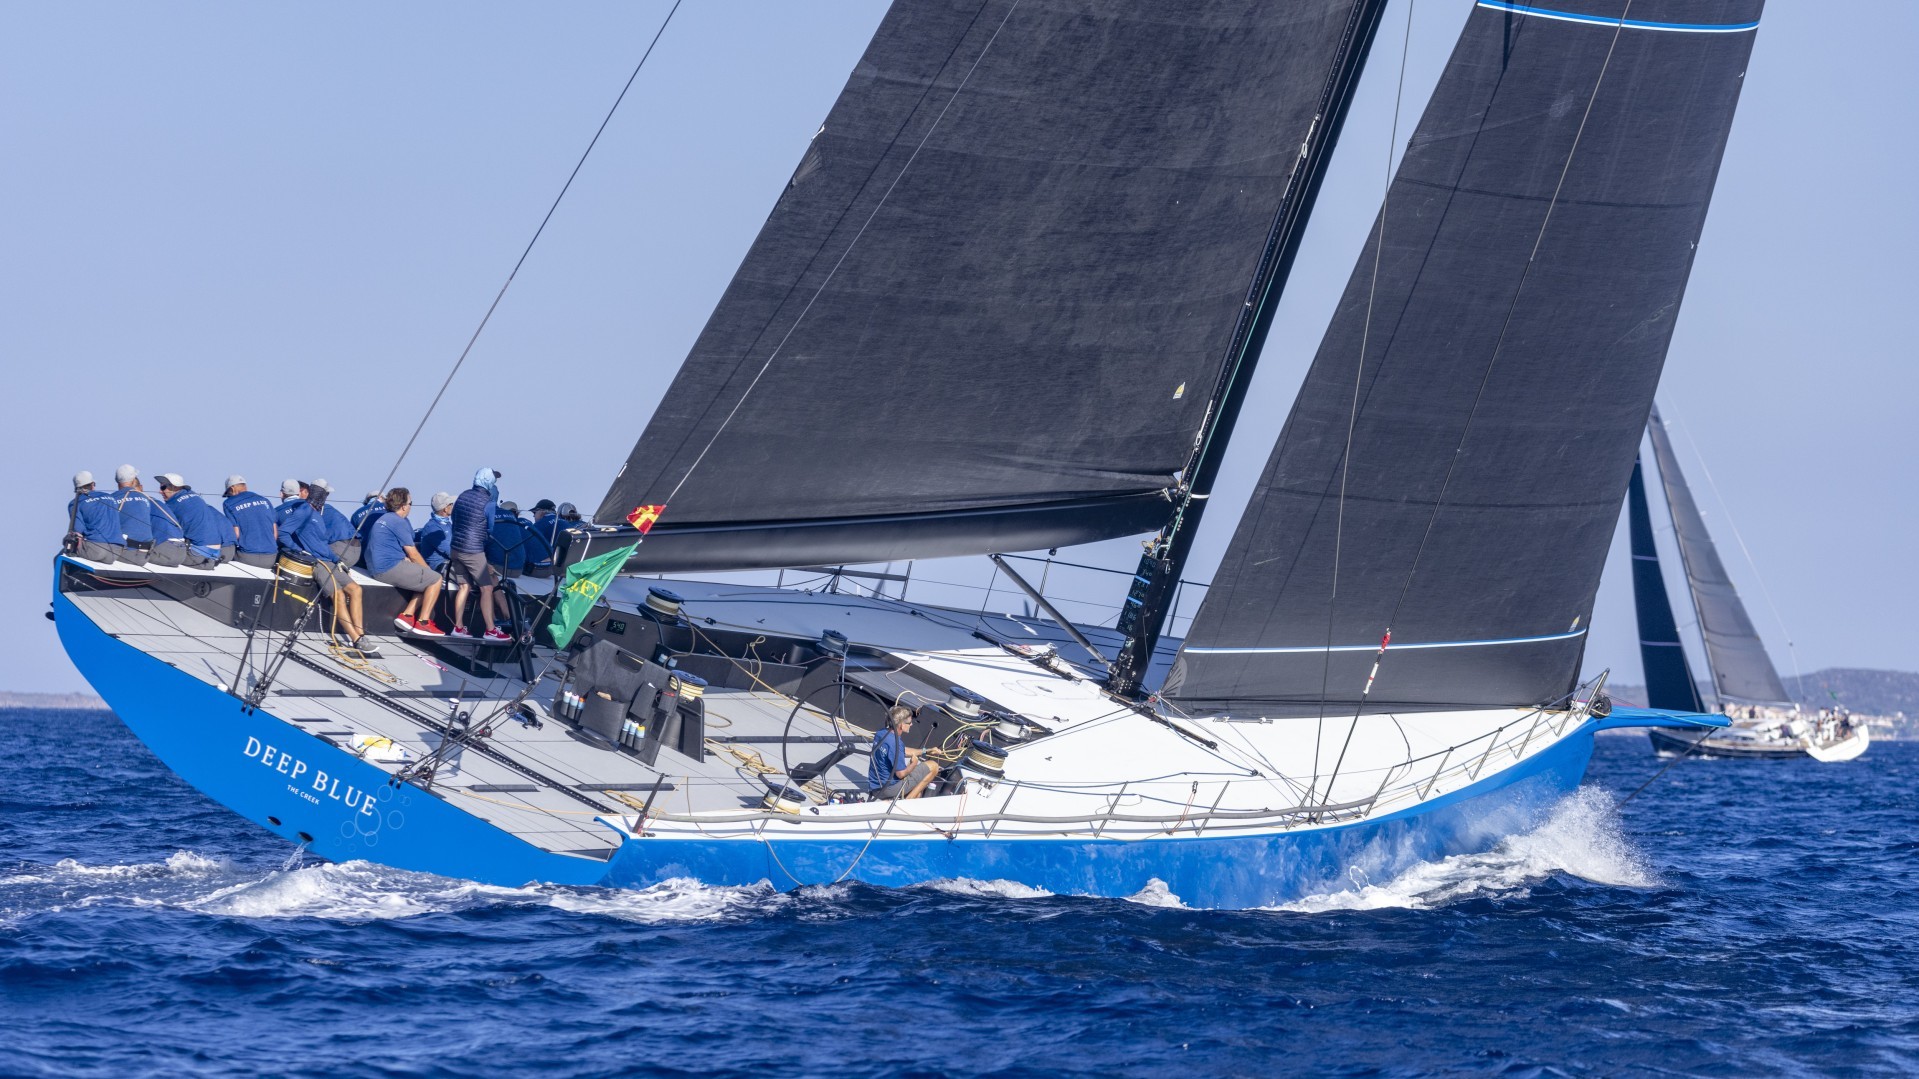 The state of the art Botin Partners 85 Deep Blue is making her debut at St Maarten Heineken Regatta, one of owner Wendy Schmidt and her team's favourite events. Photo: IMA / Studio Borlenghi.